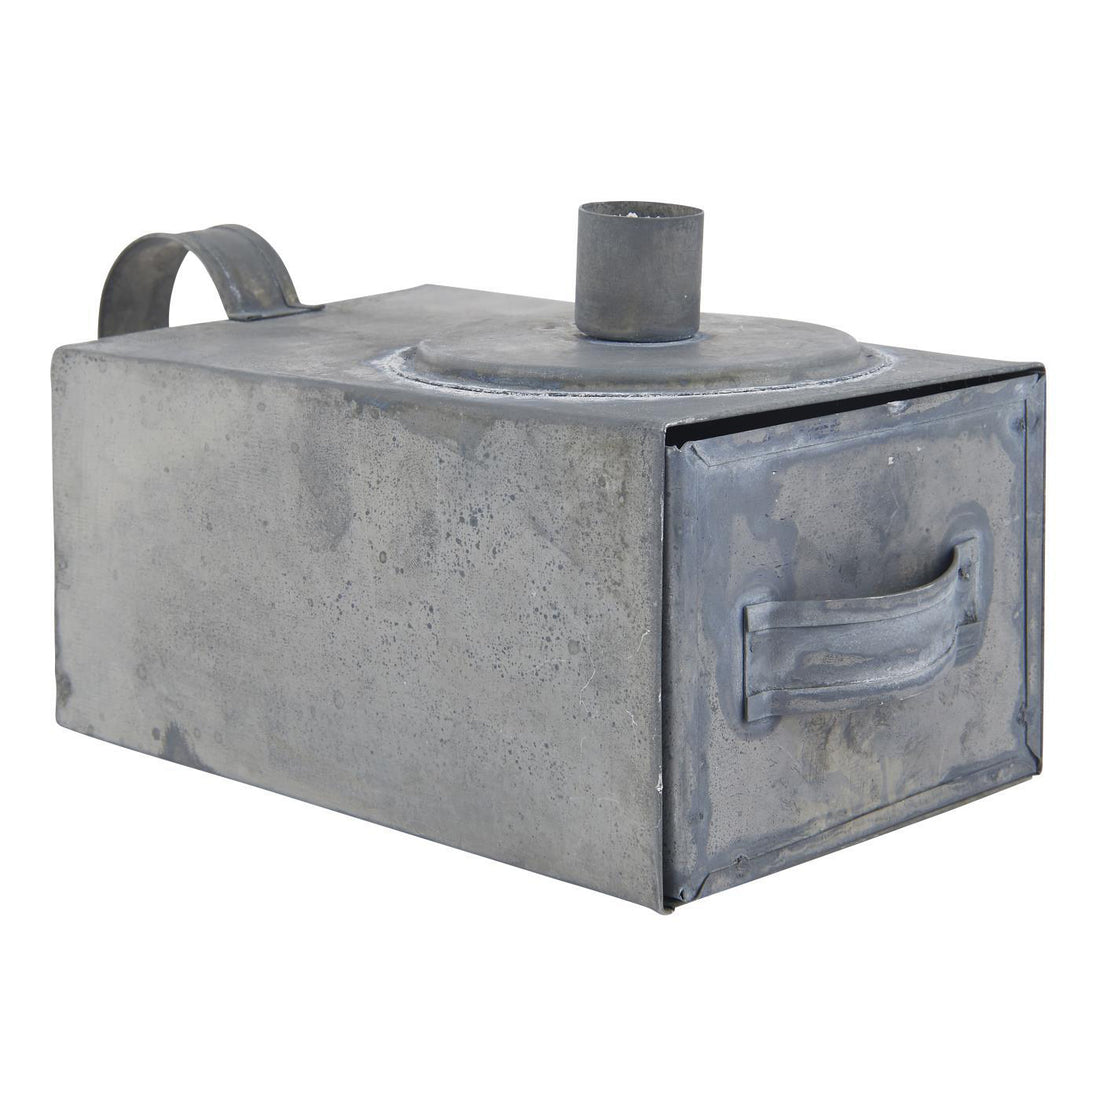 ZINC CANDLE HOLDER WITH DRAWER